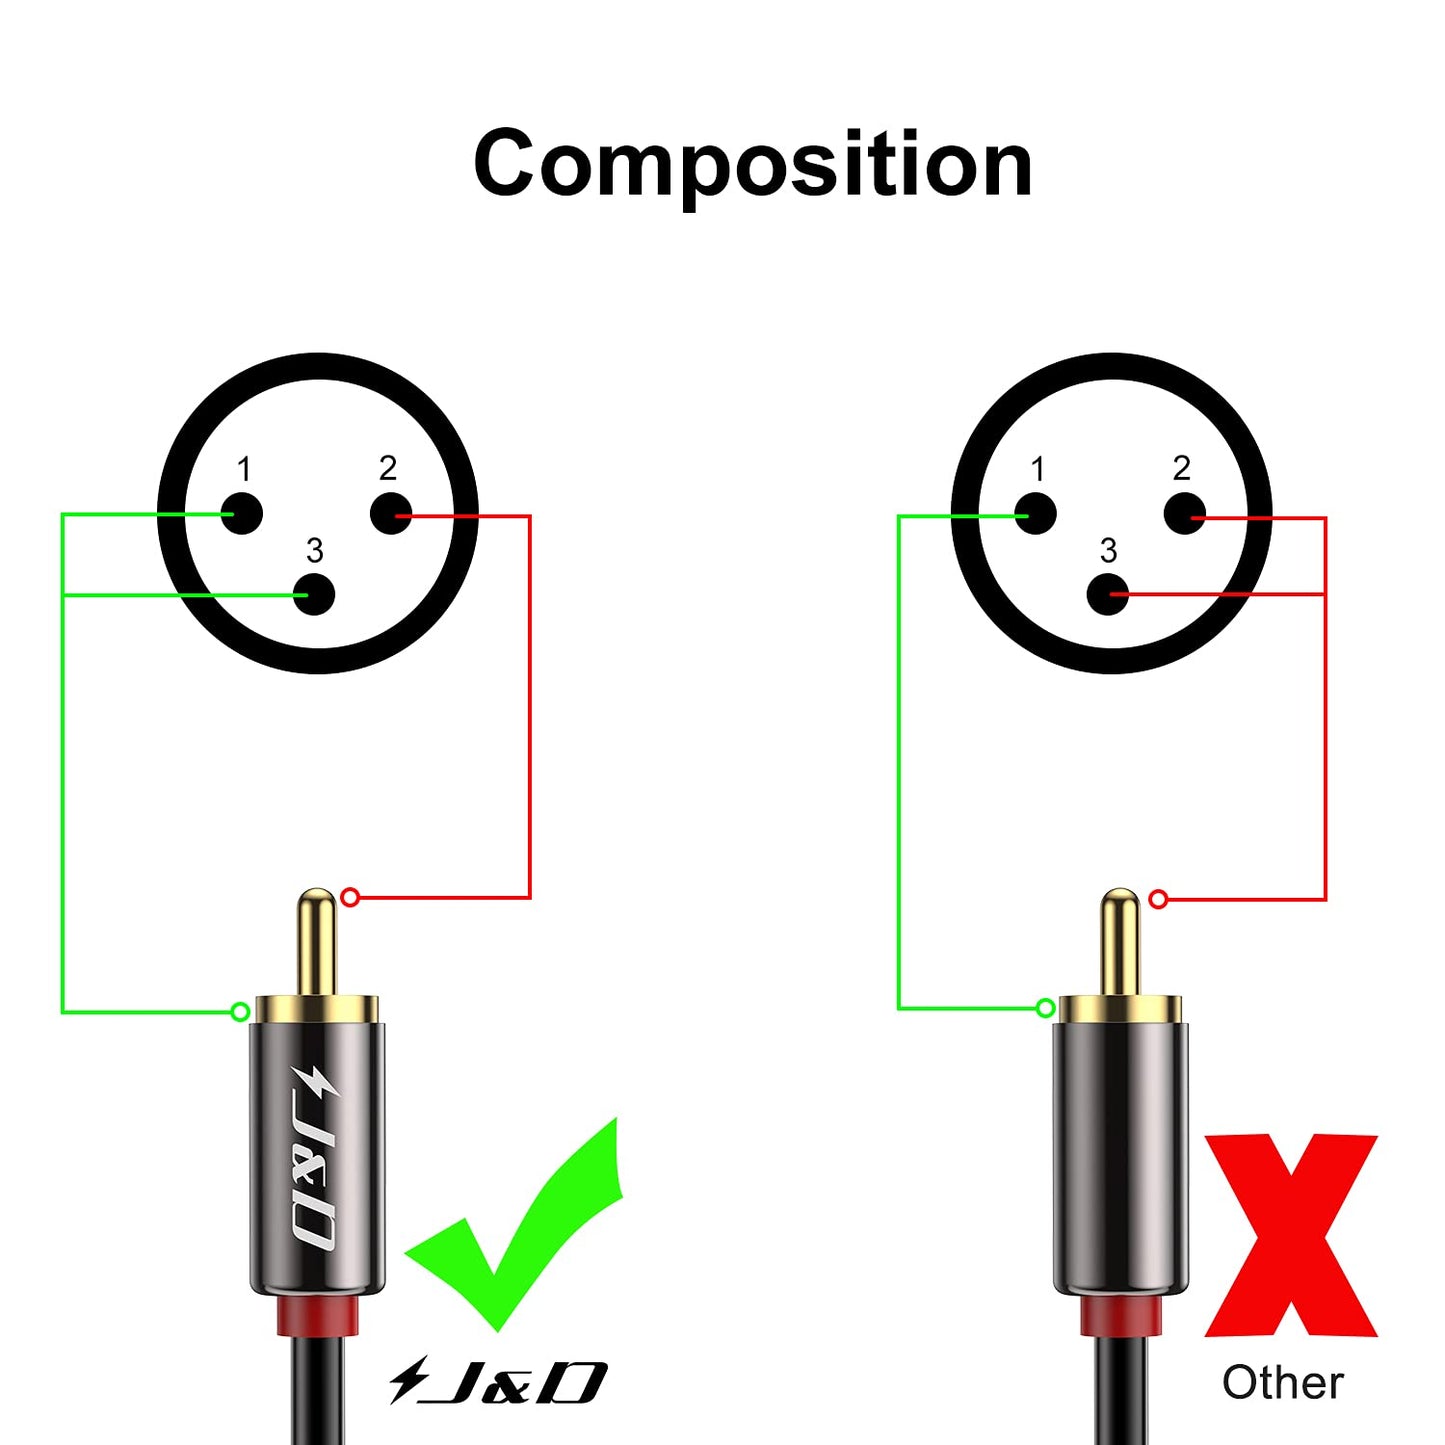 J&D XLR to 2 RCA Y Splitter Patch Cable, PVC Shelled Unbalanced Dual RCA Male to XLR Male Stereo Audio Interconnect Cable Adapter for Speaker